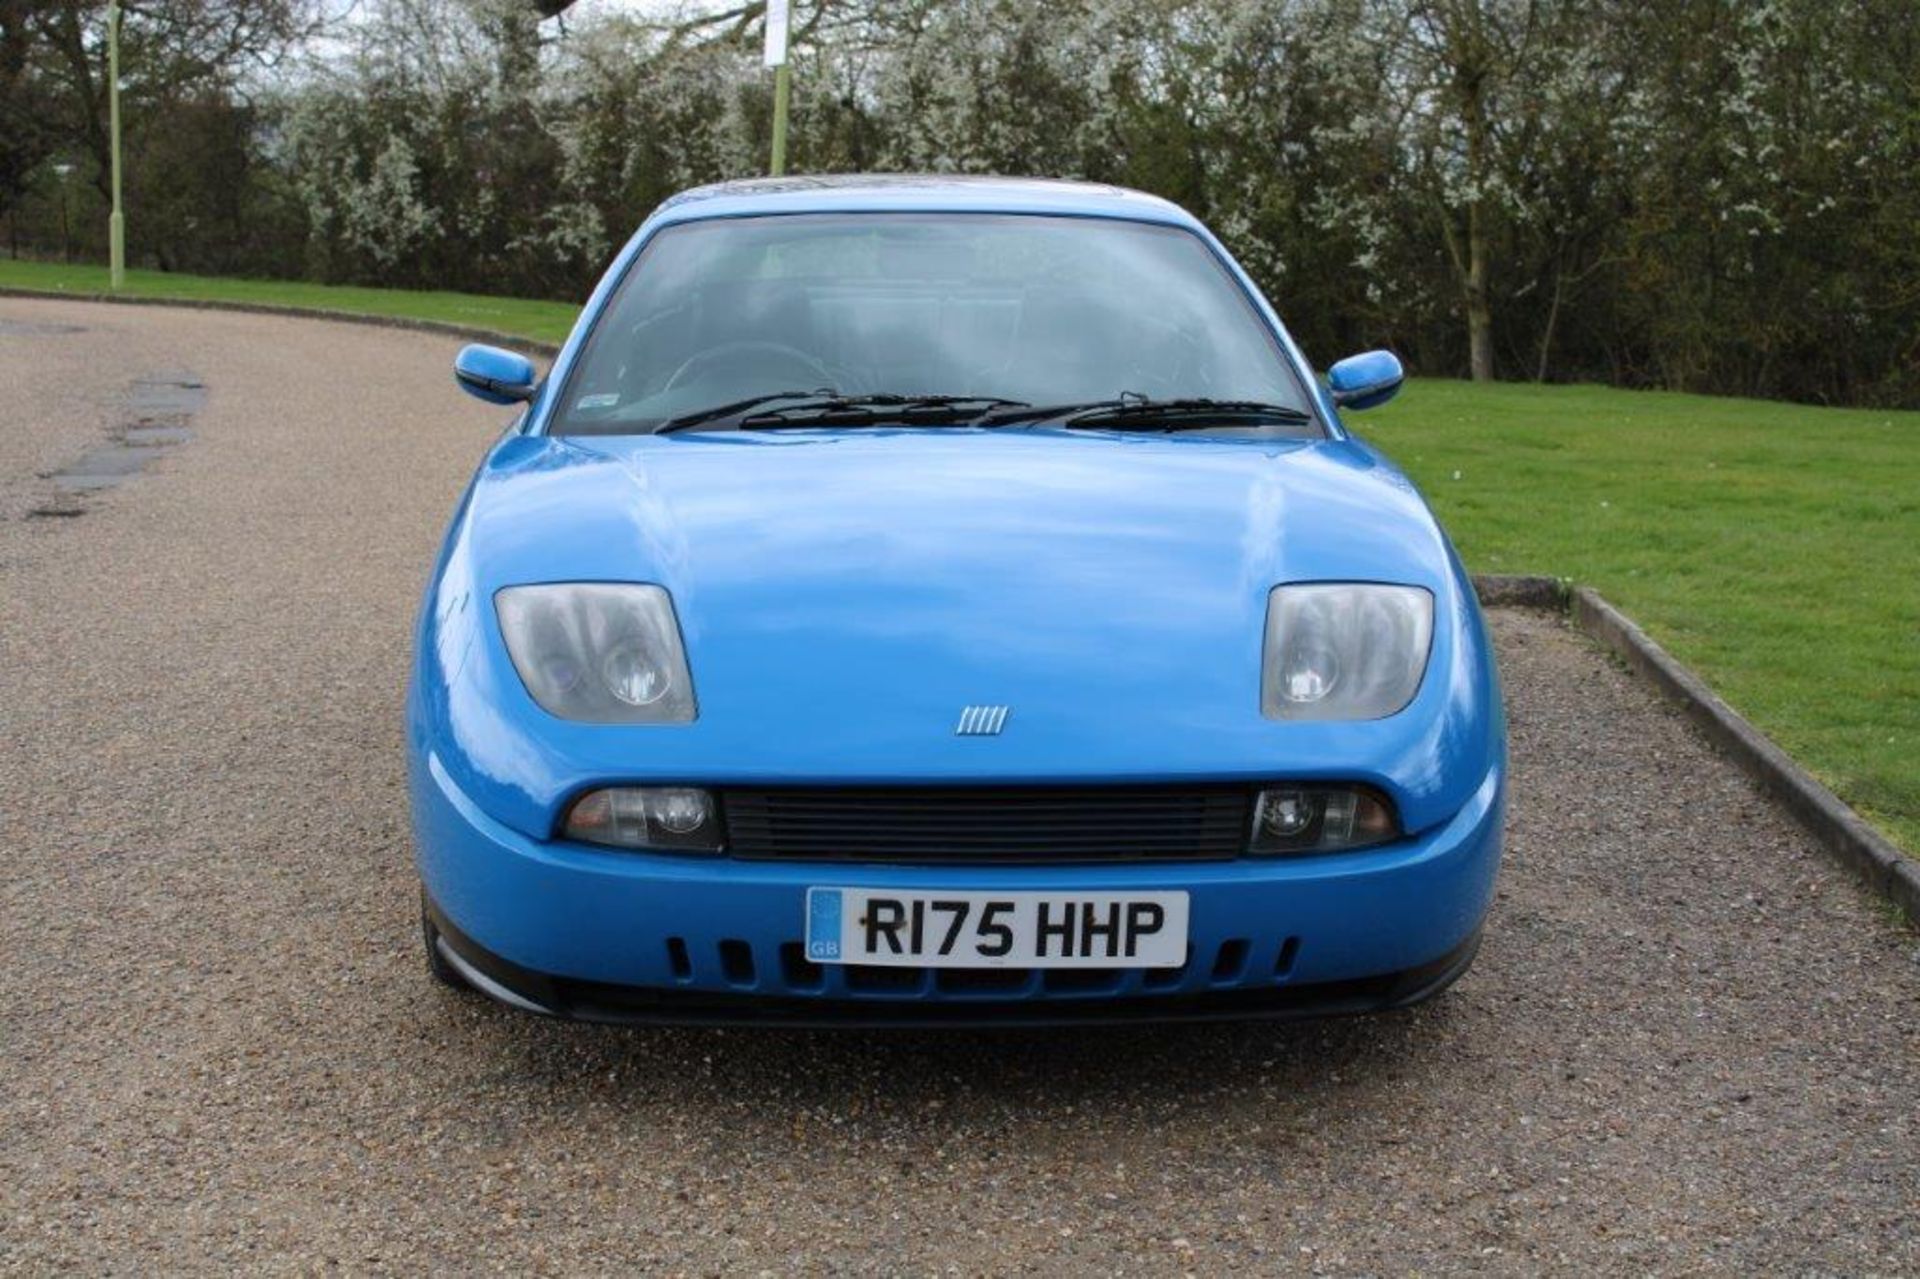 1997 Fiat Coupe 20V Turbo - Image 3 of 13